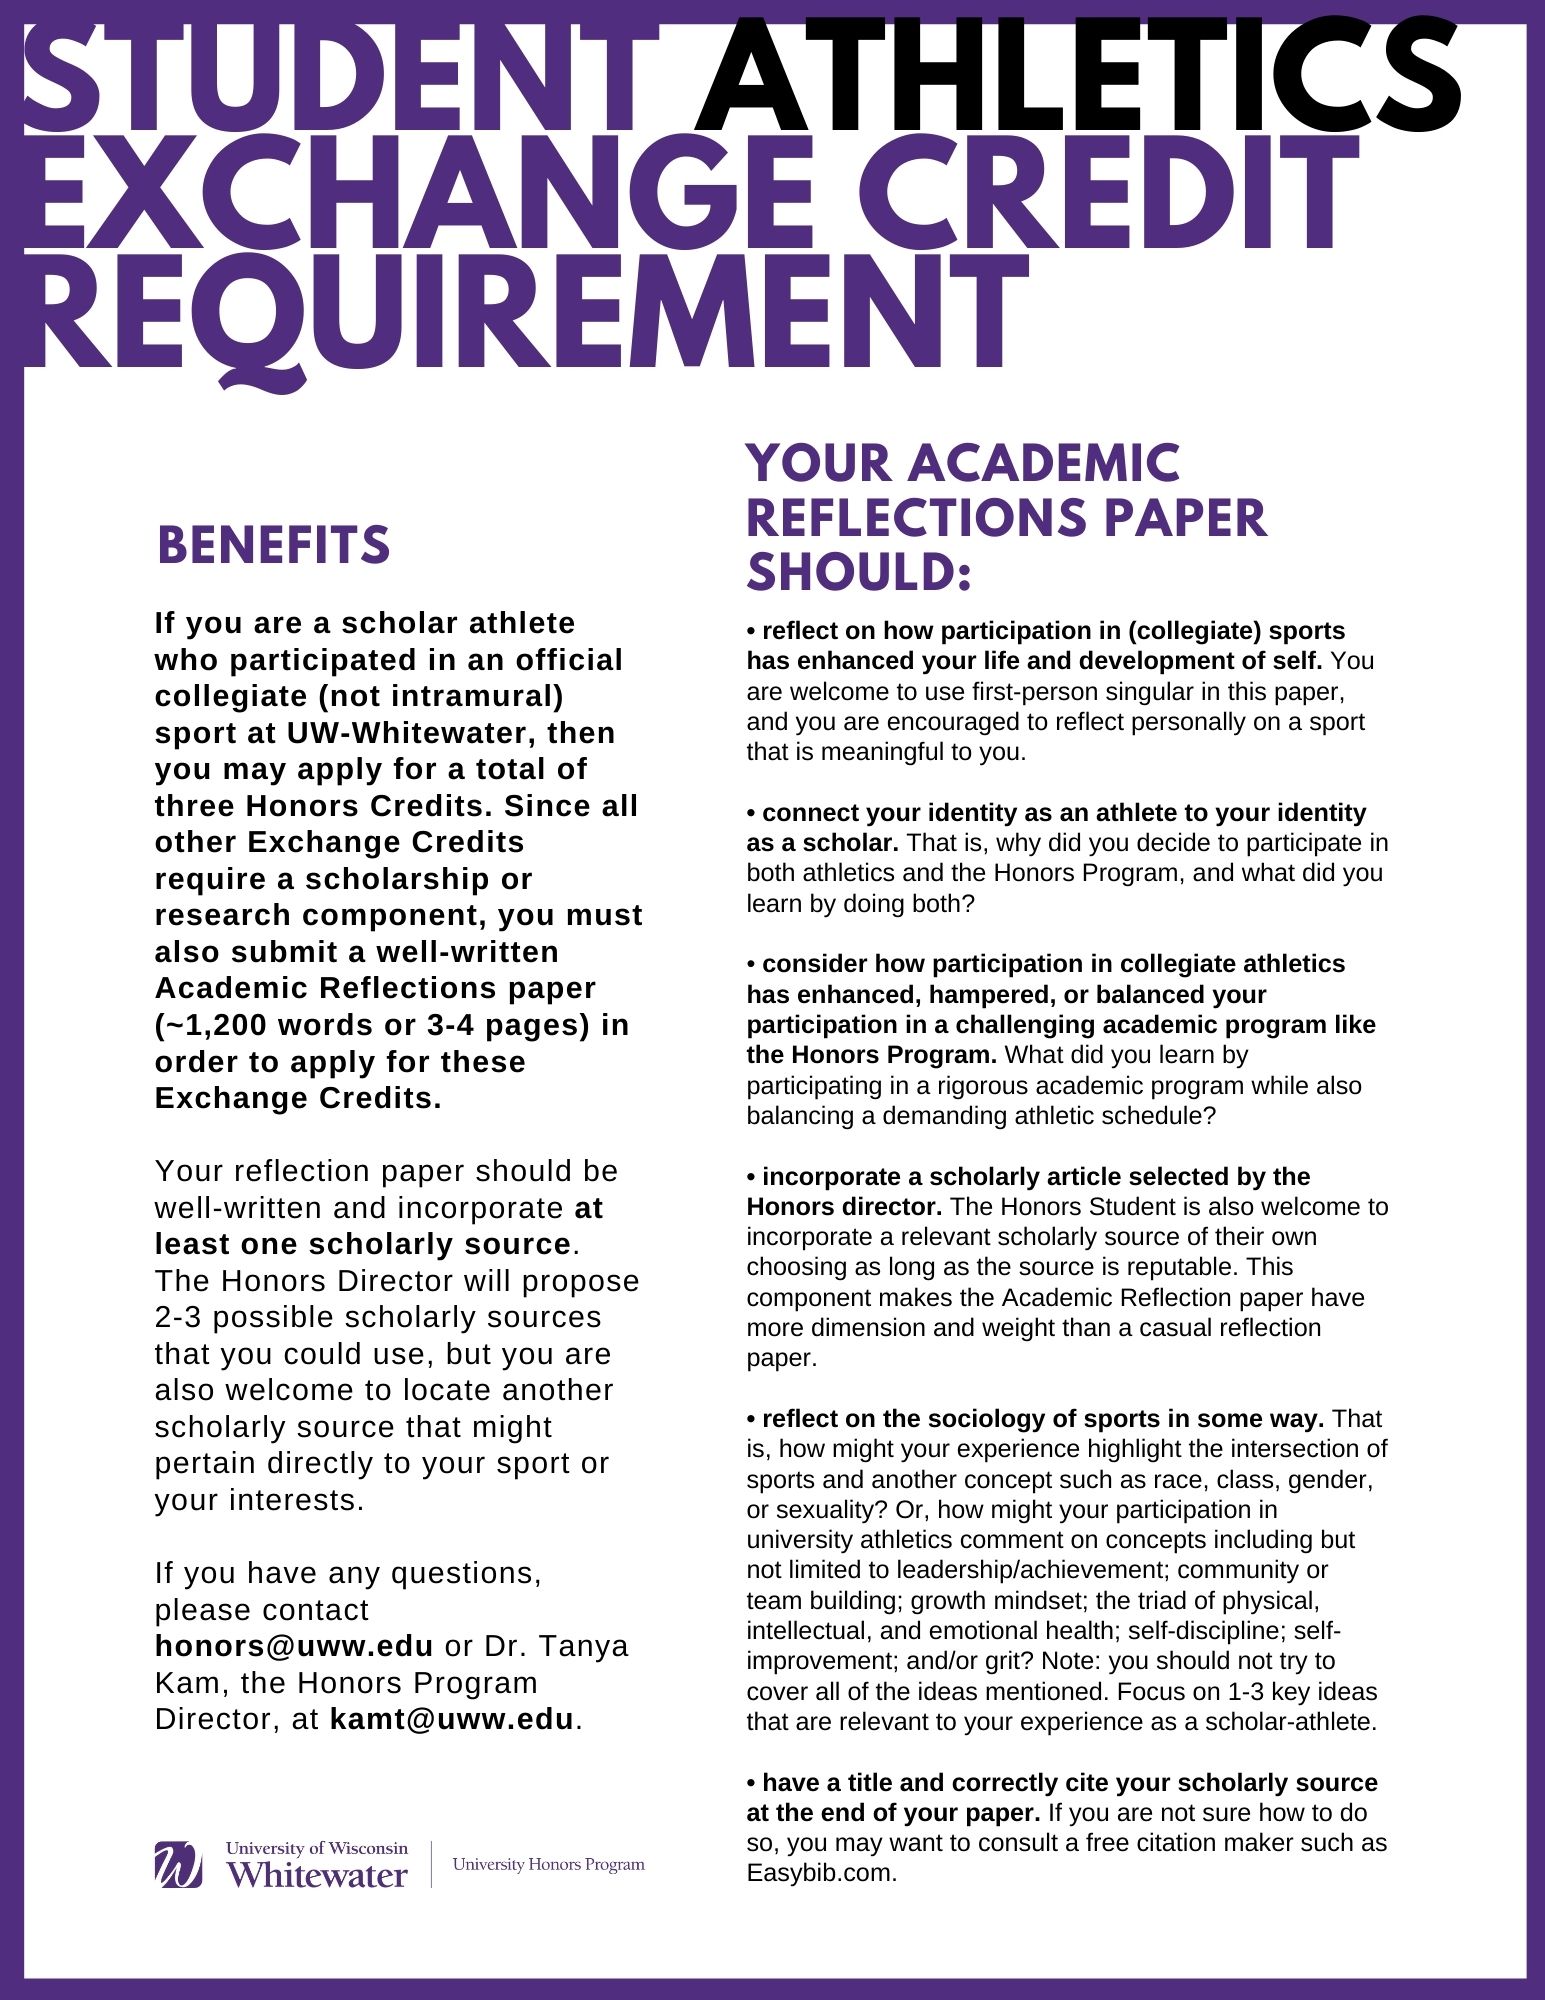 Brochure for student athletic exchange credit requirements